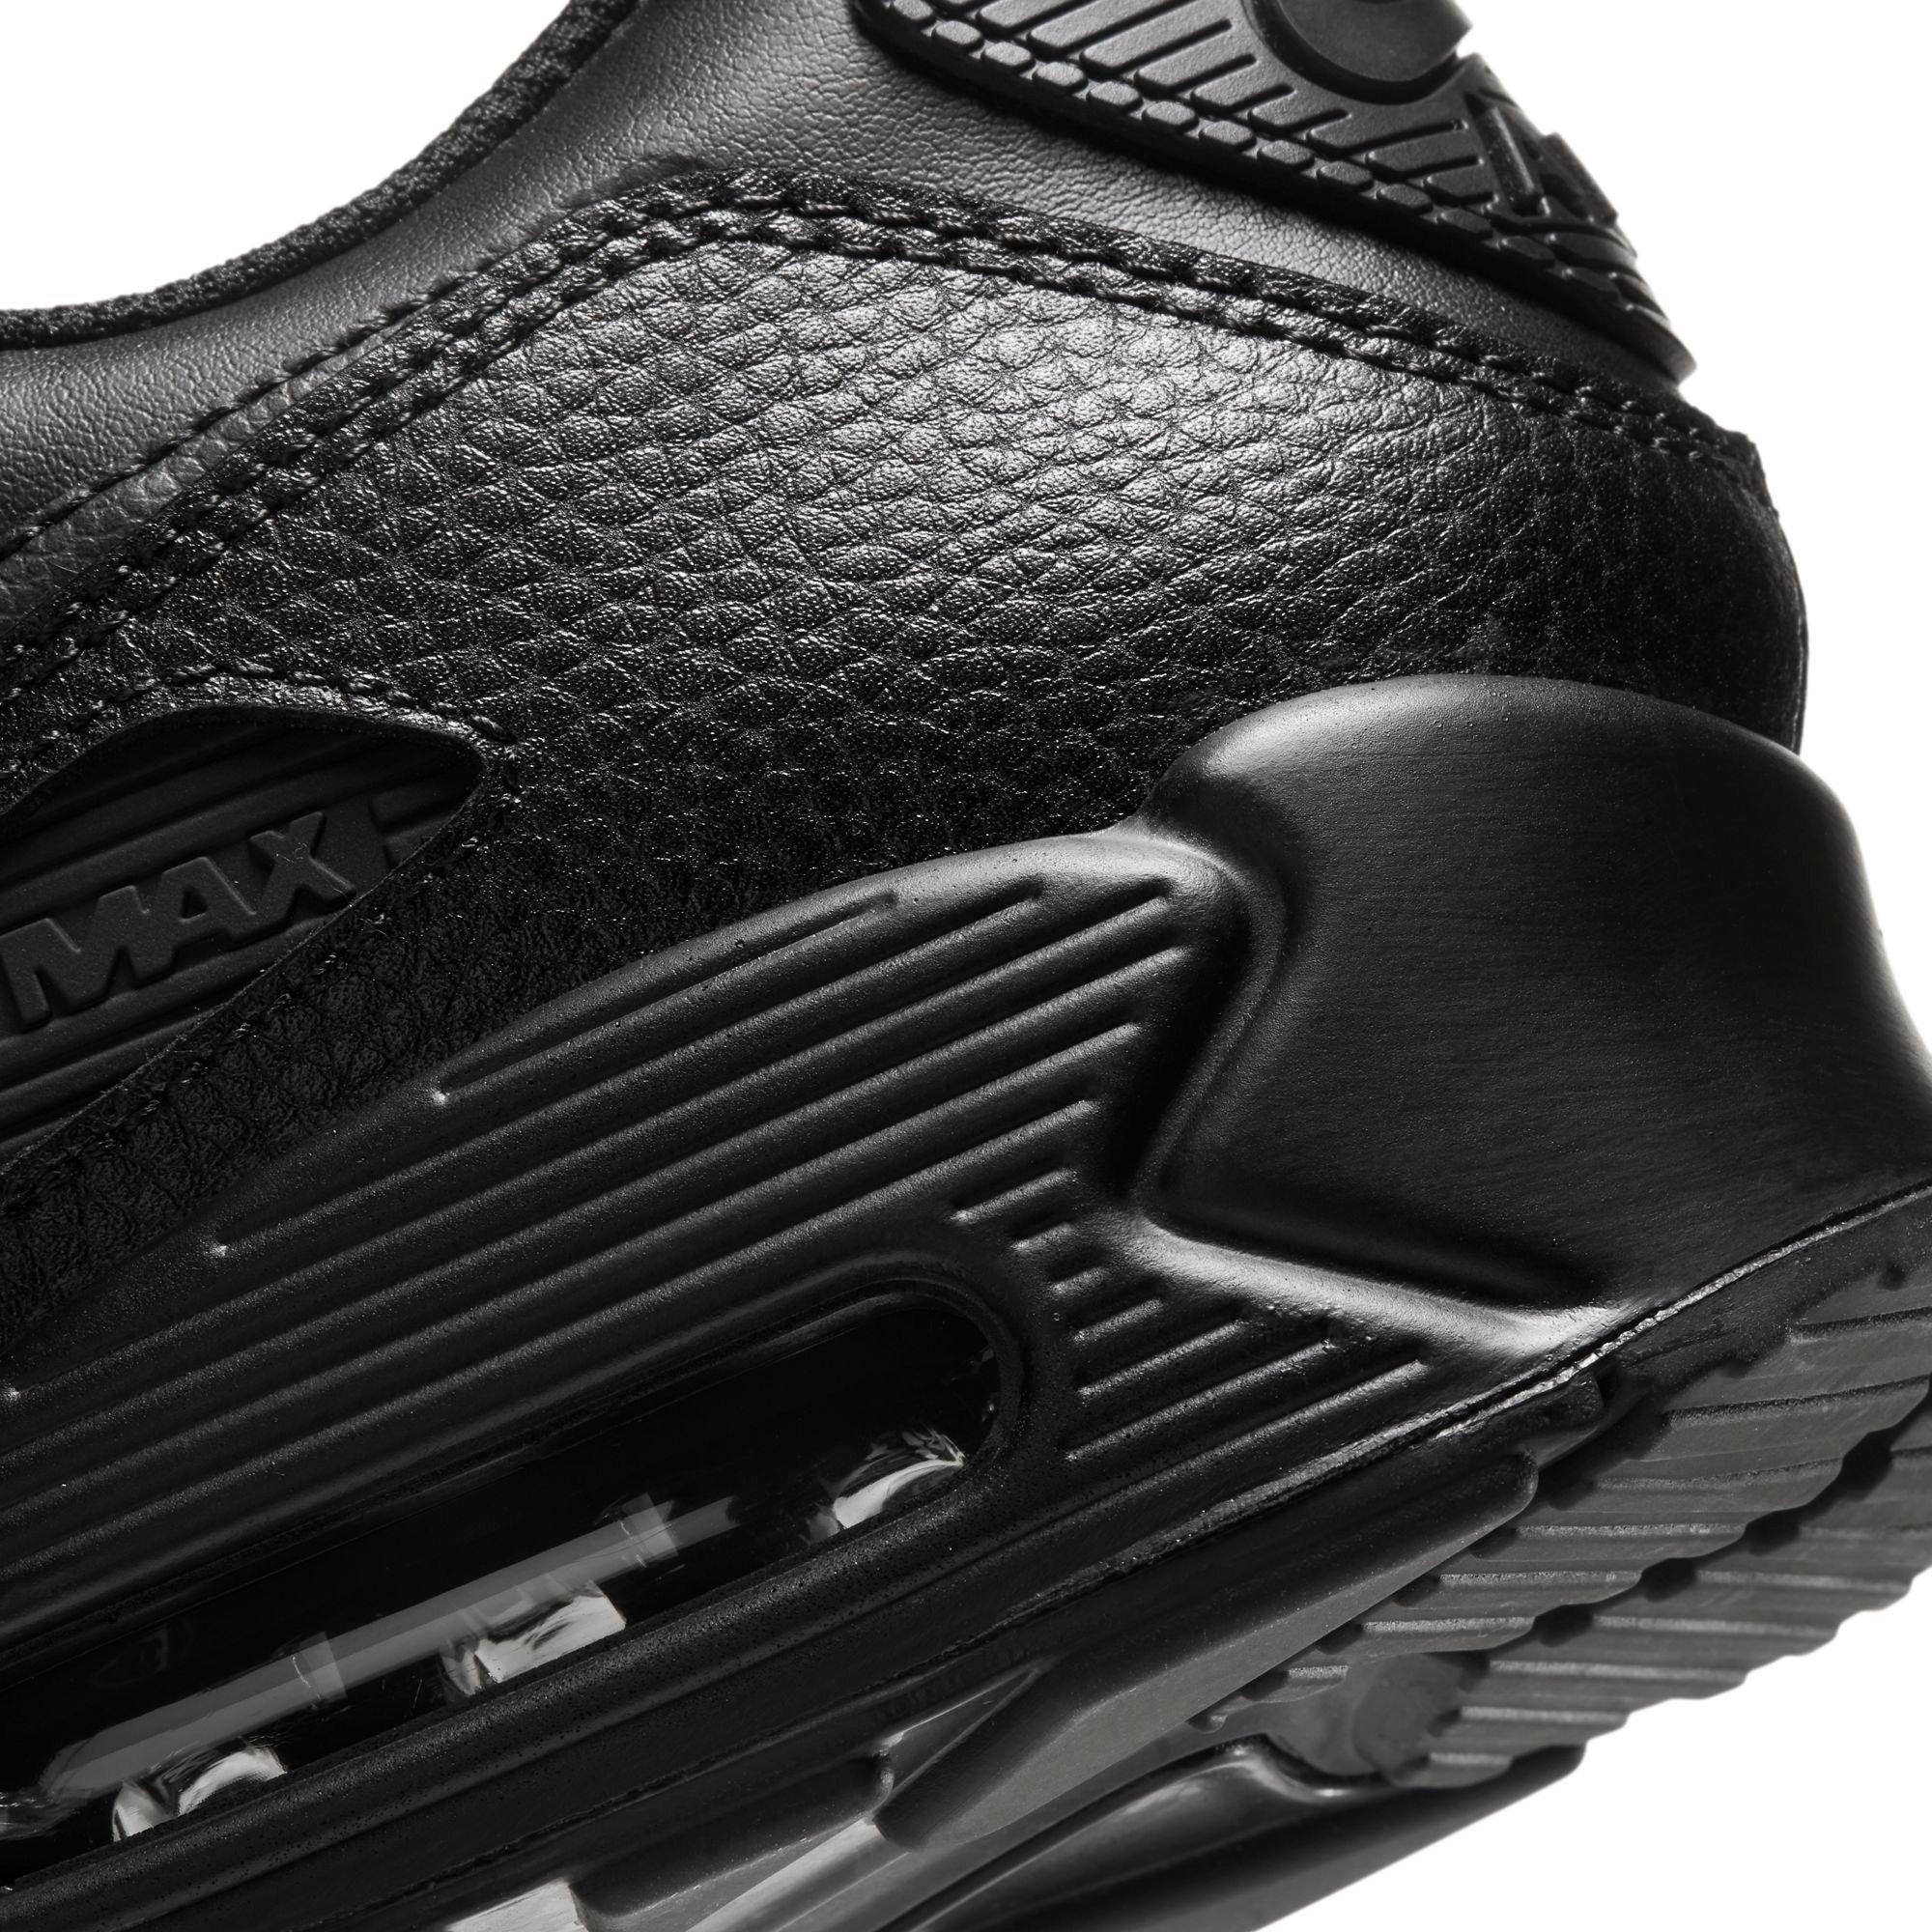 Nike Air Max Leather "Black" Men's Shoes